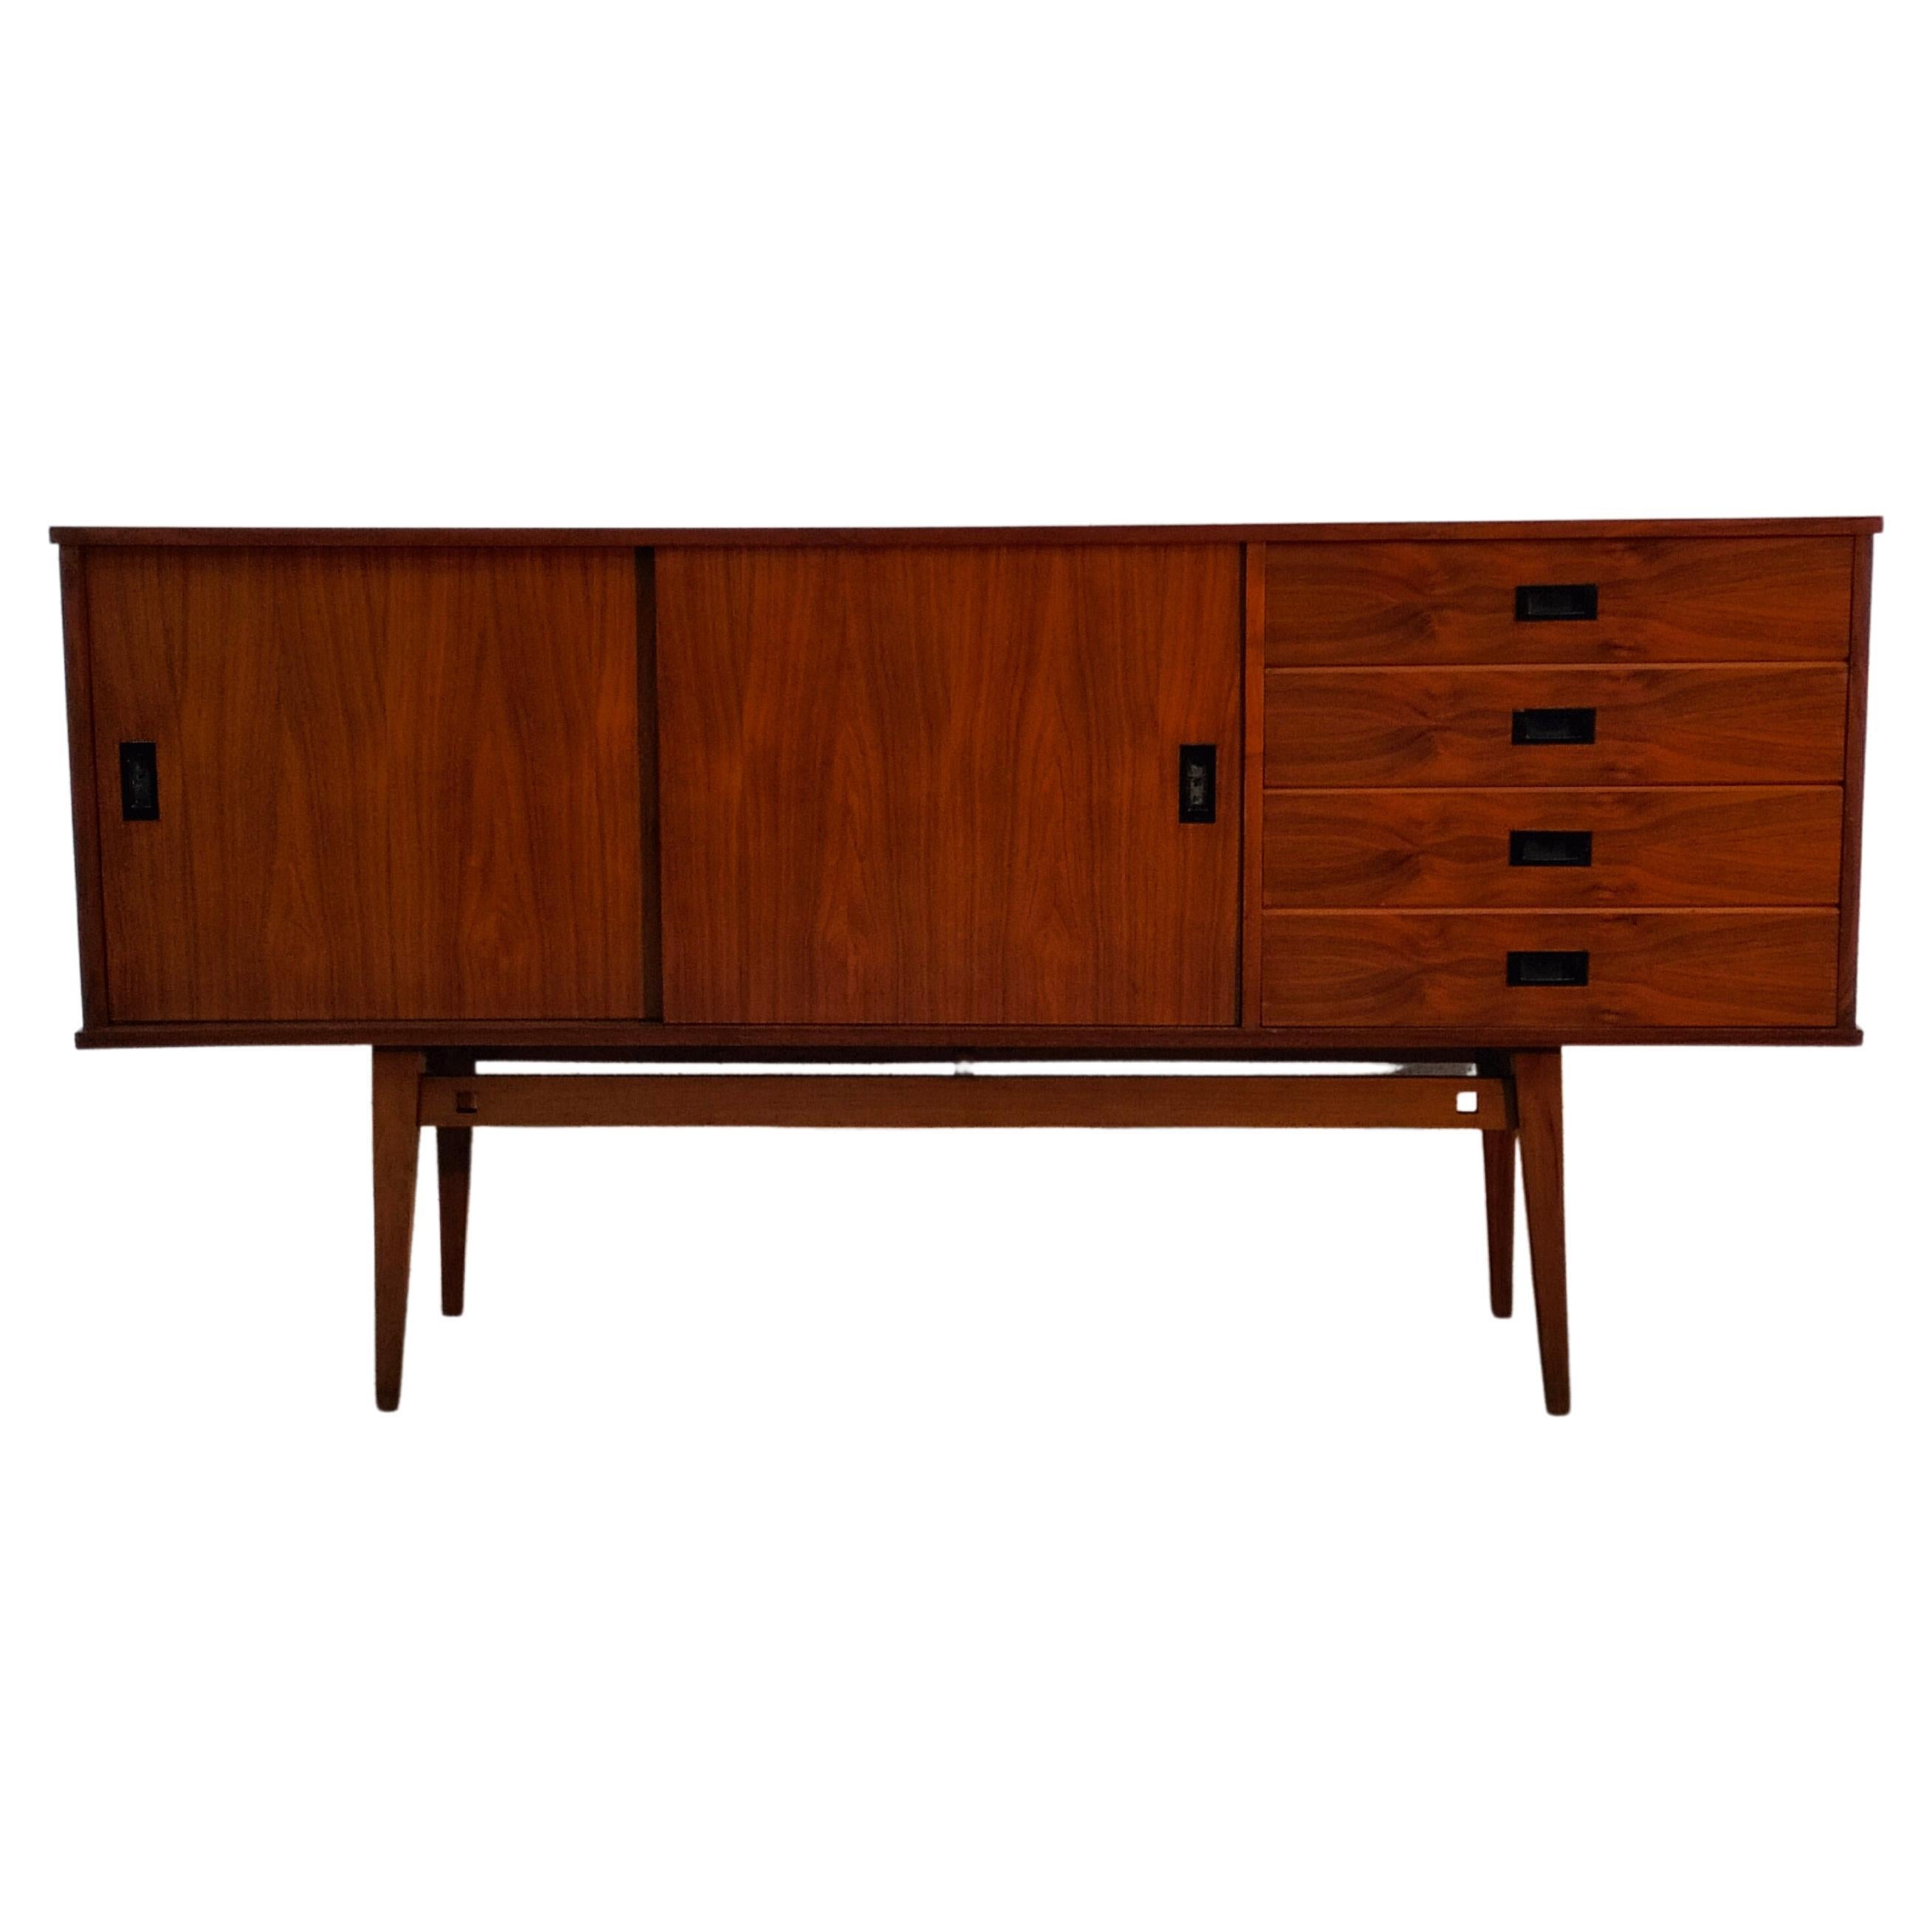 Nordic Scandinavian Style Teak Sideboard from the 1960s For Sale